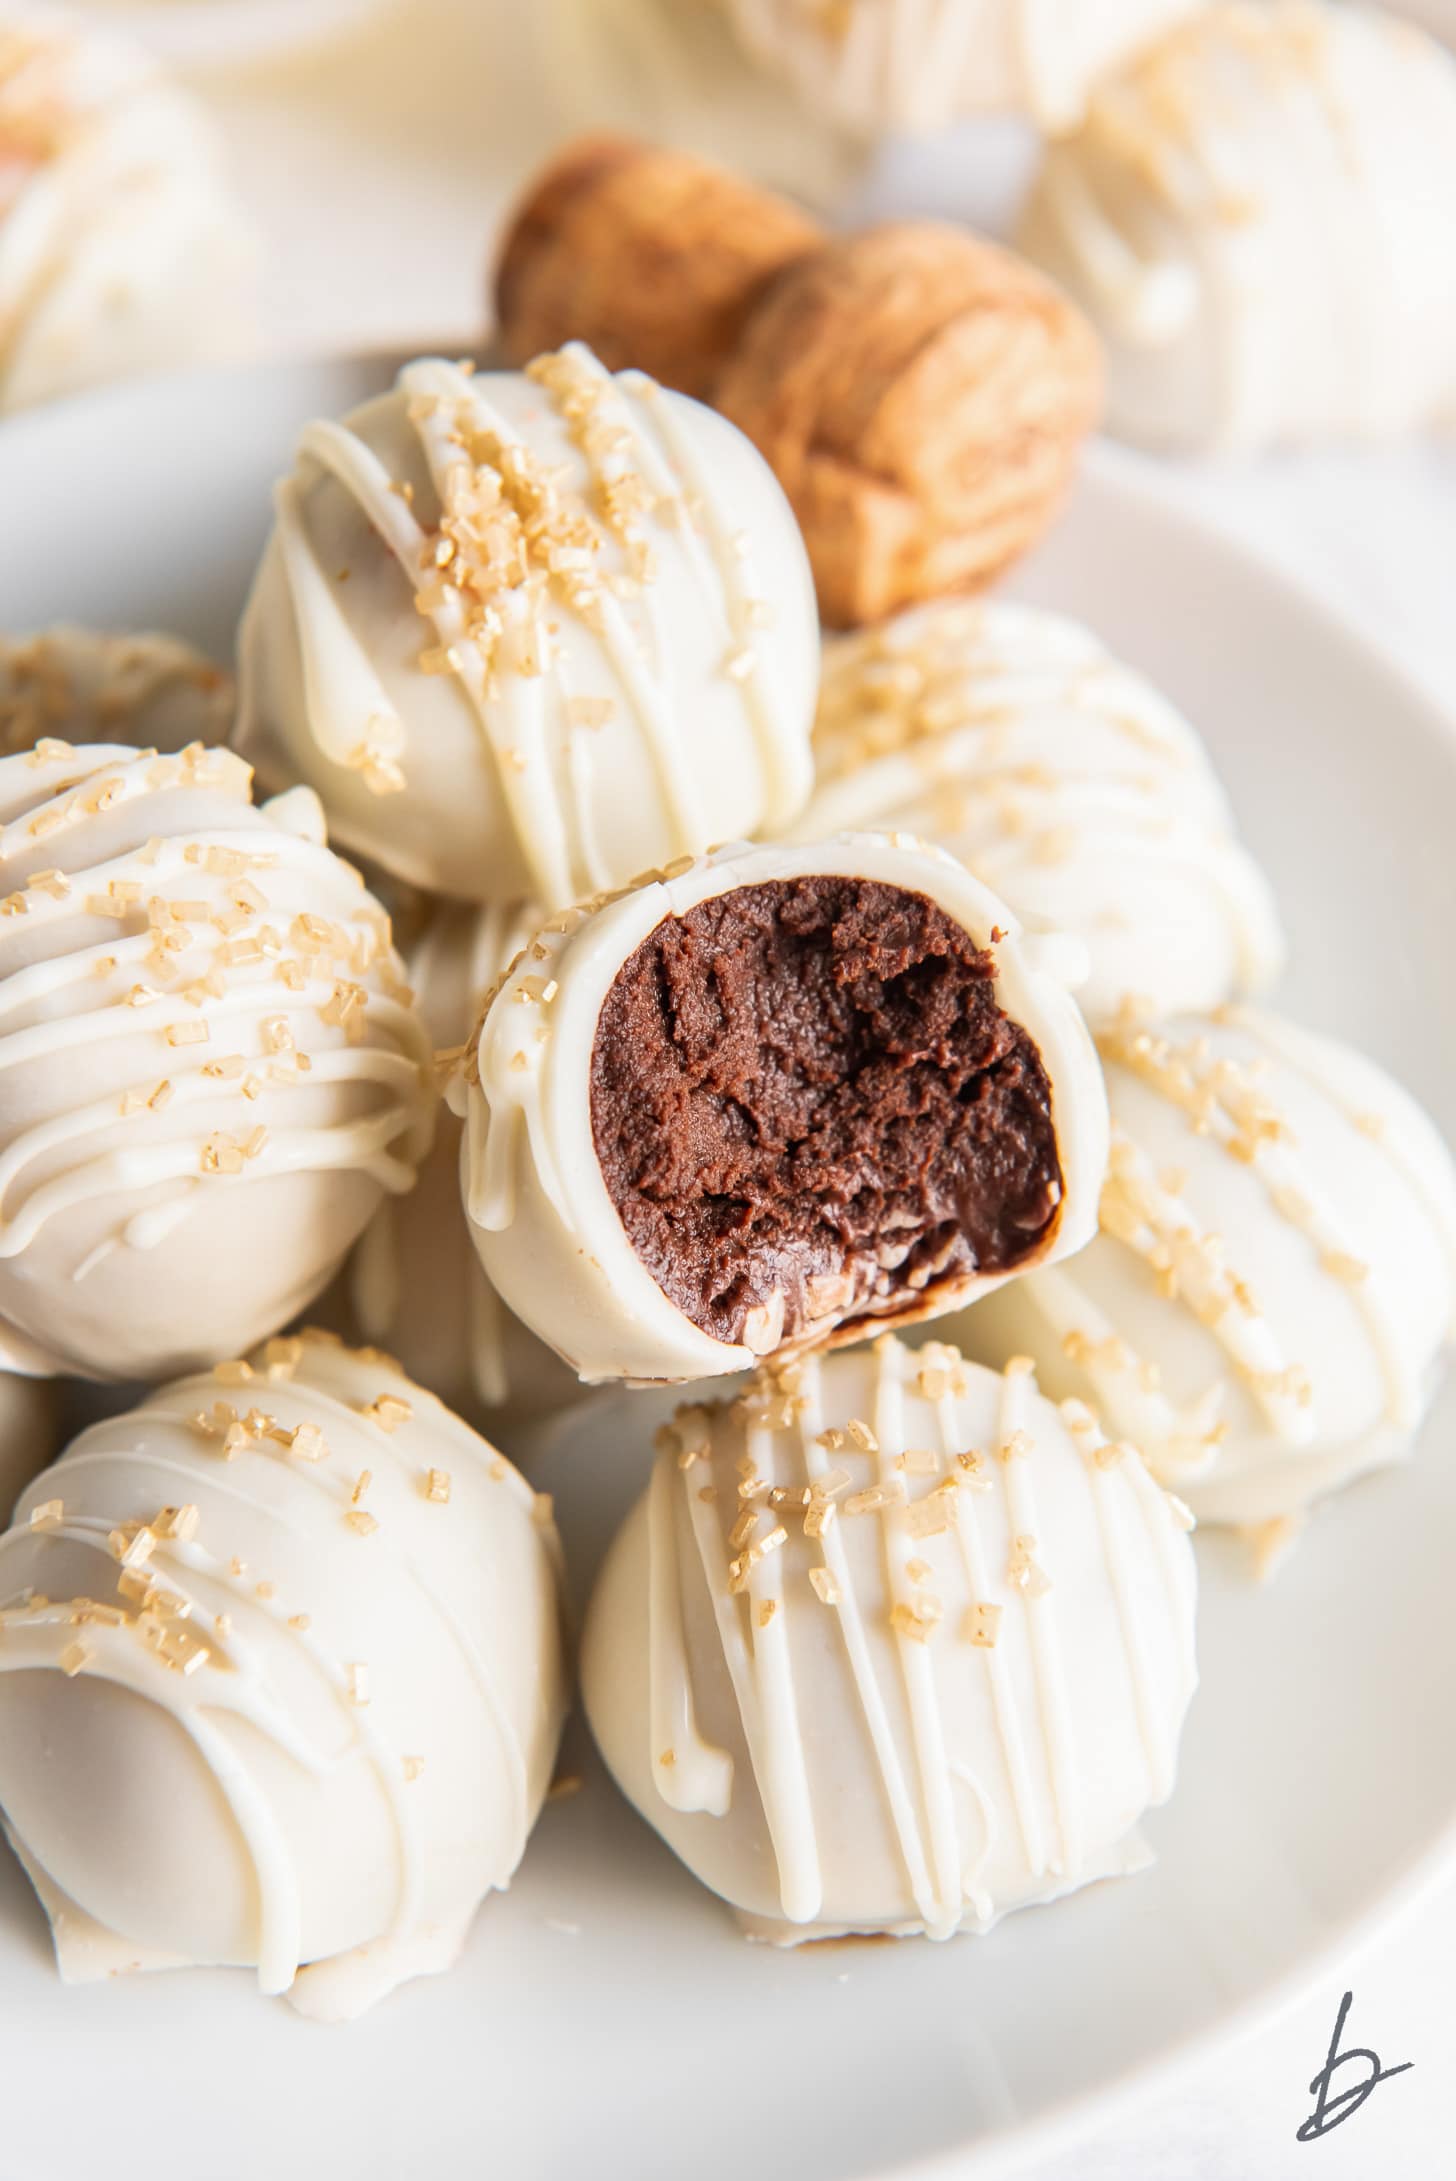 white chocolate covered champagne truffle with a bite showing chocolate inside